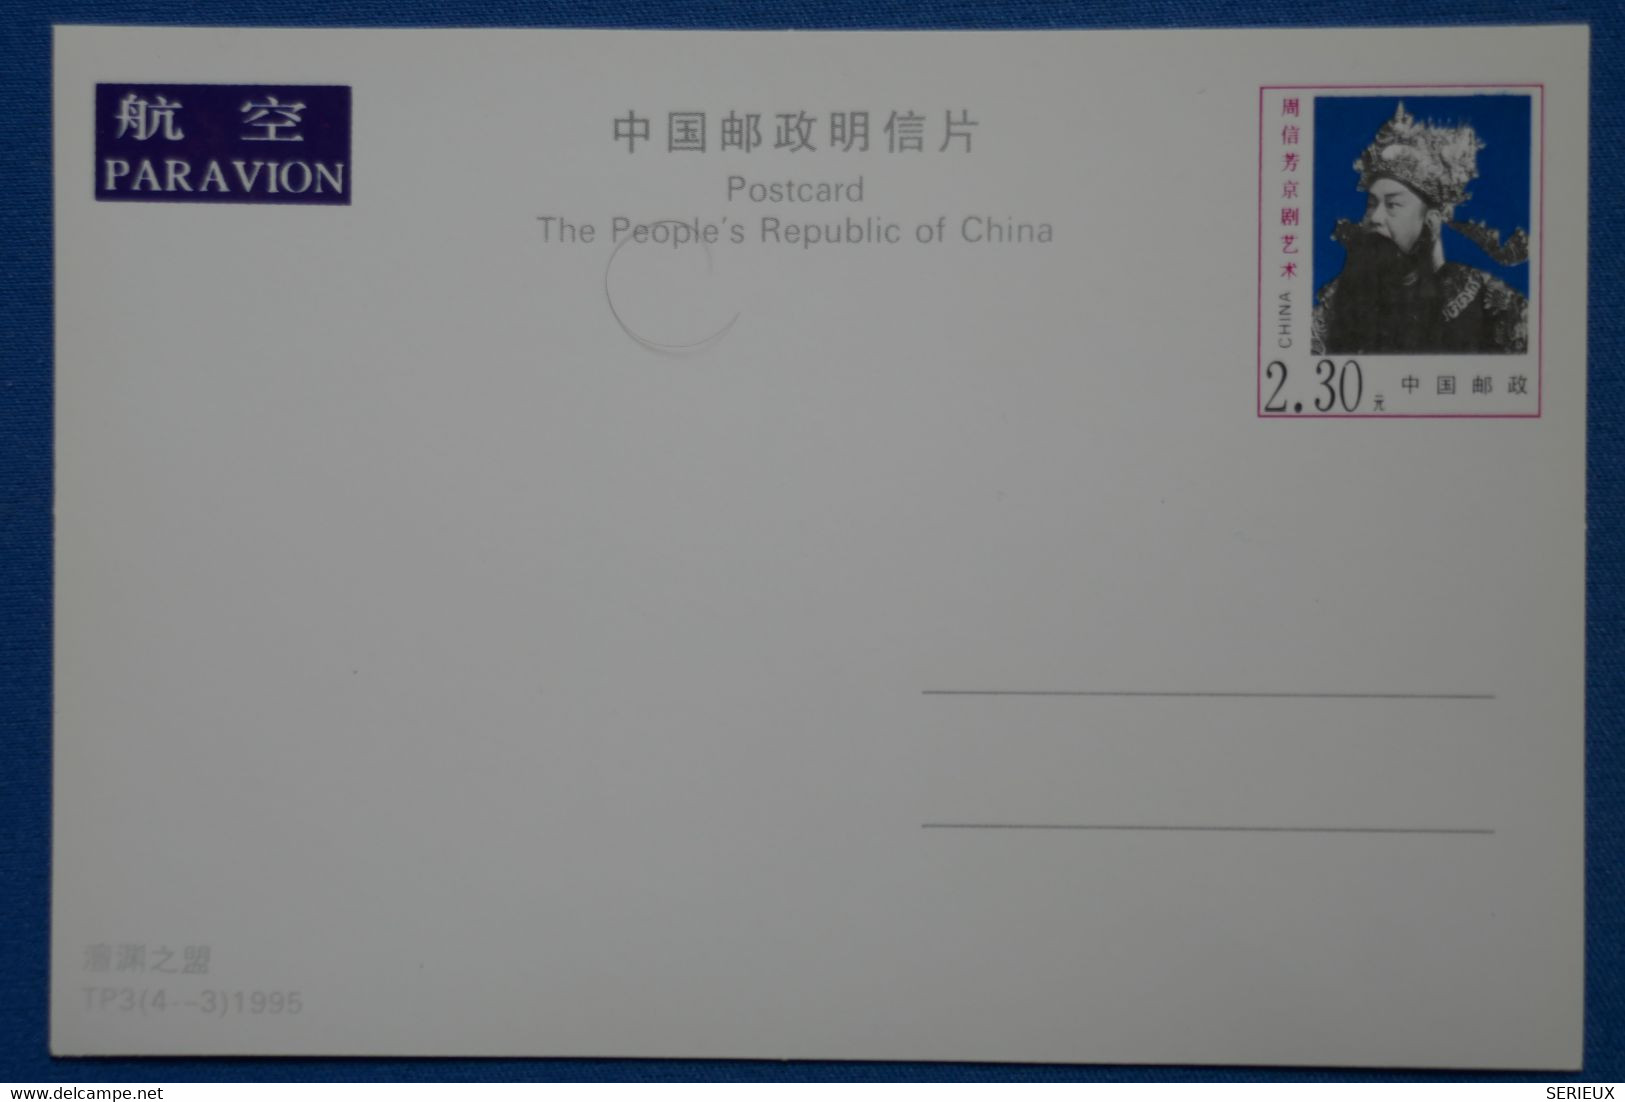 S9 CHINA BELLE CARTE 1995 NON VOYAGEE  CHINE ALLIANCE FORMED - Covers & Documents